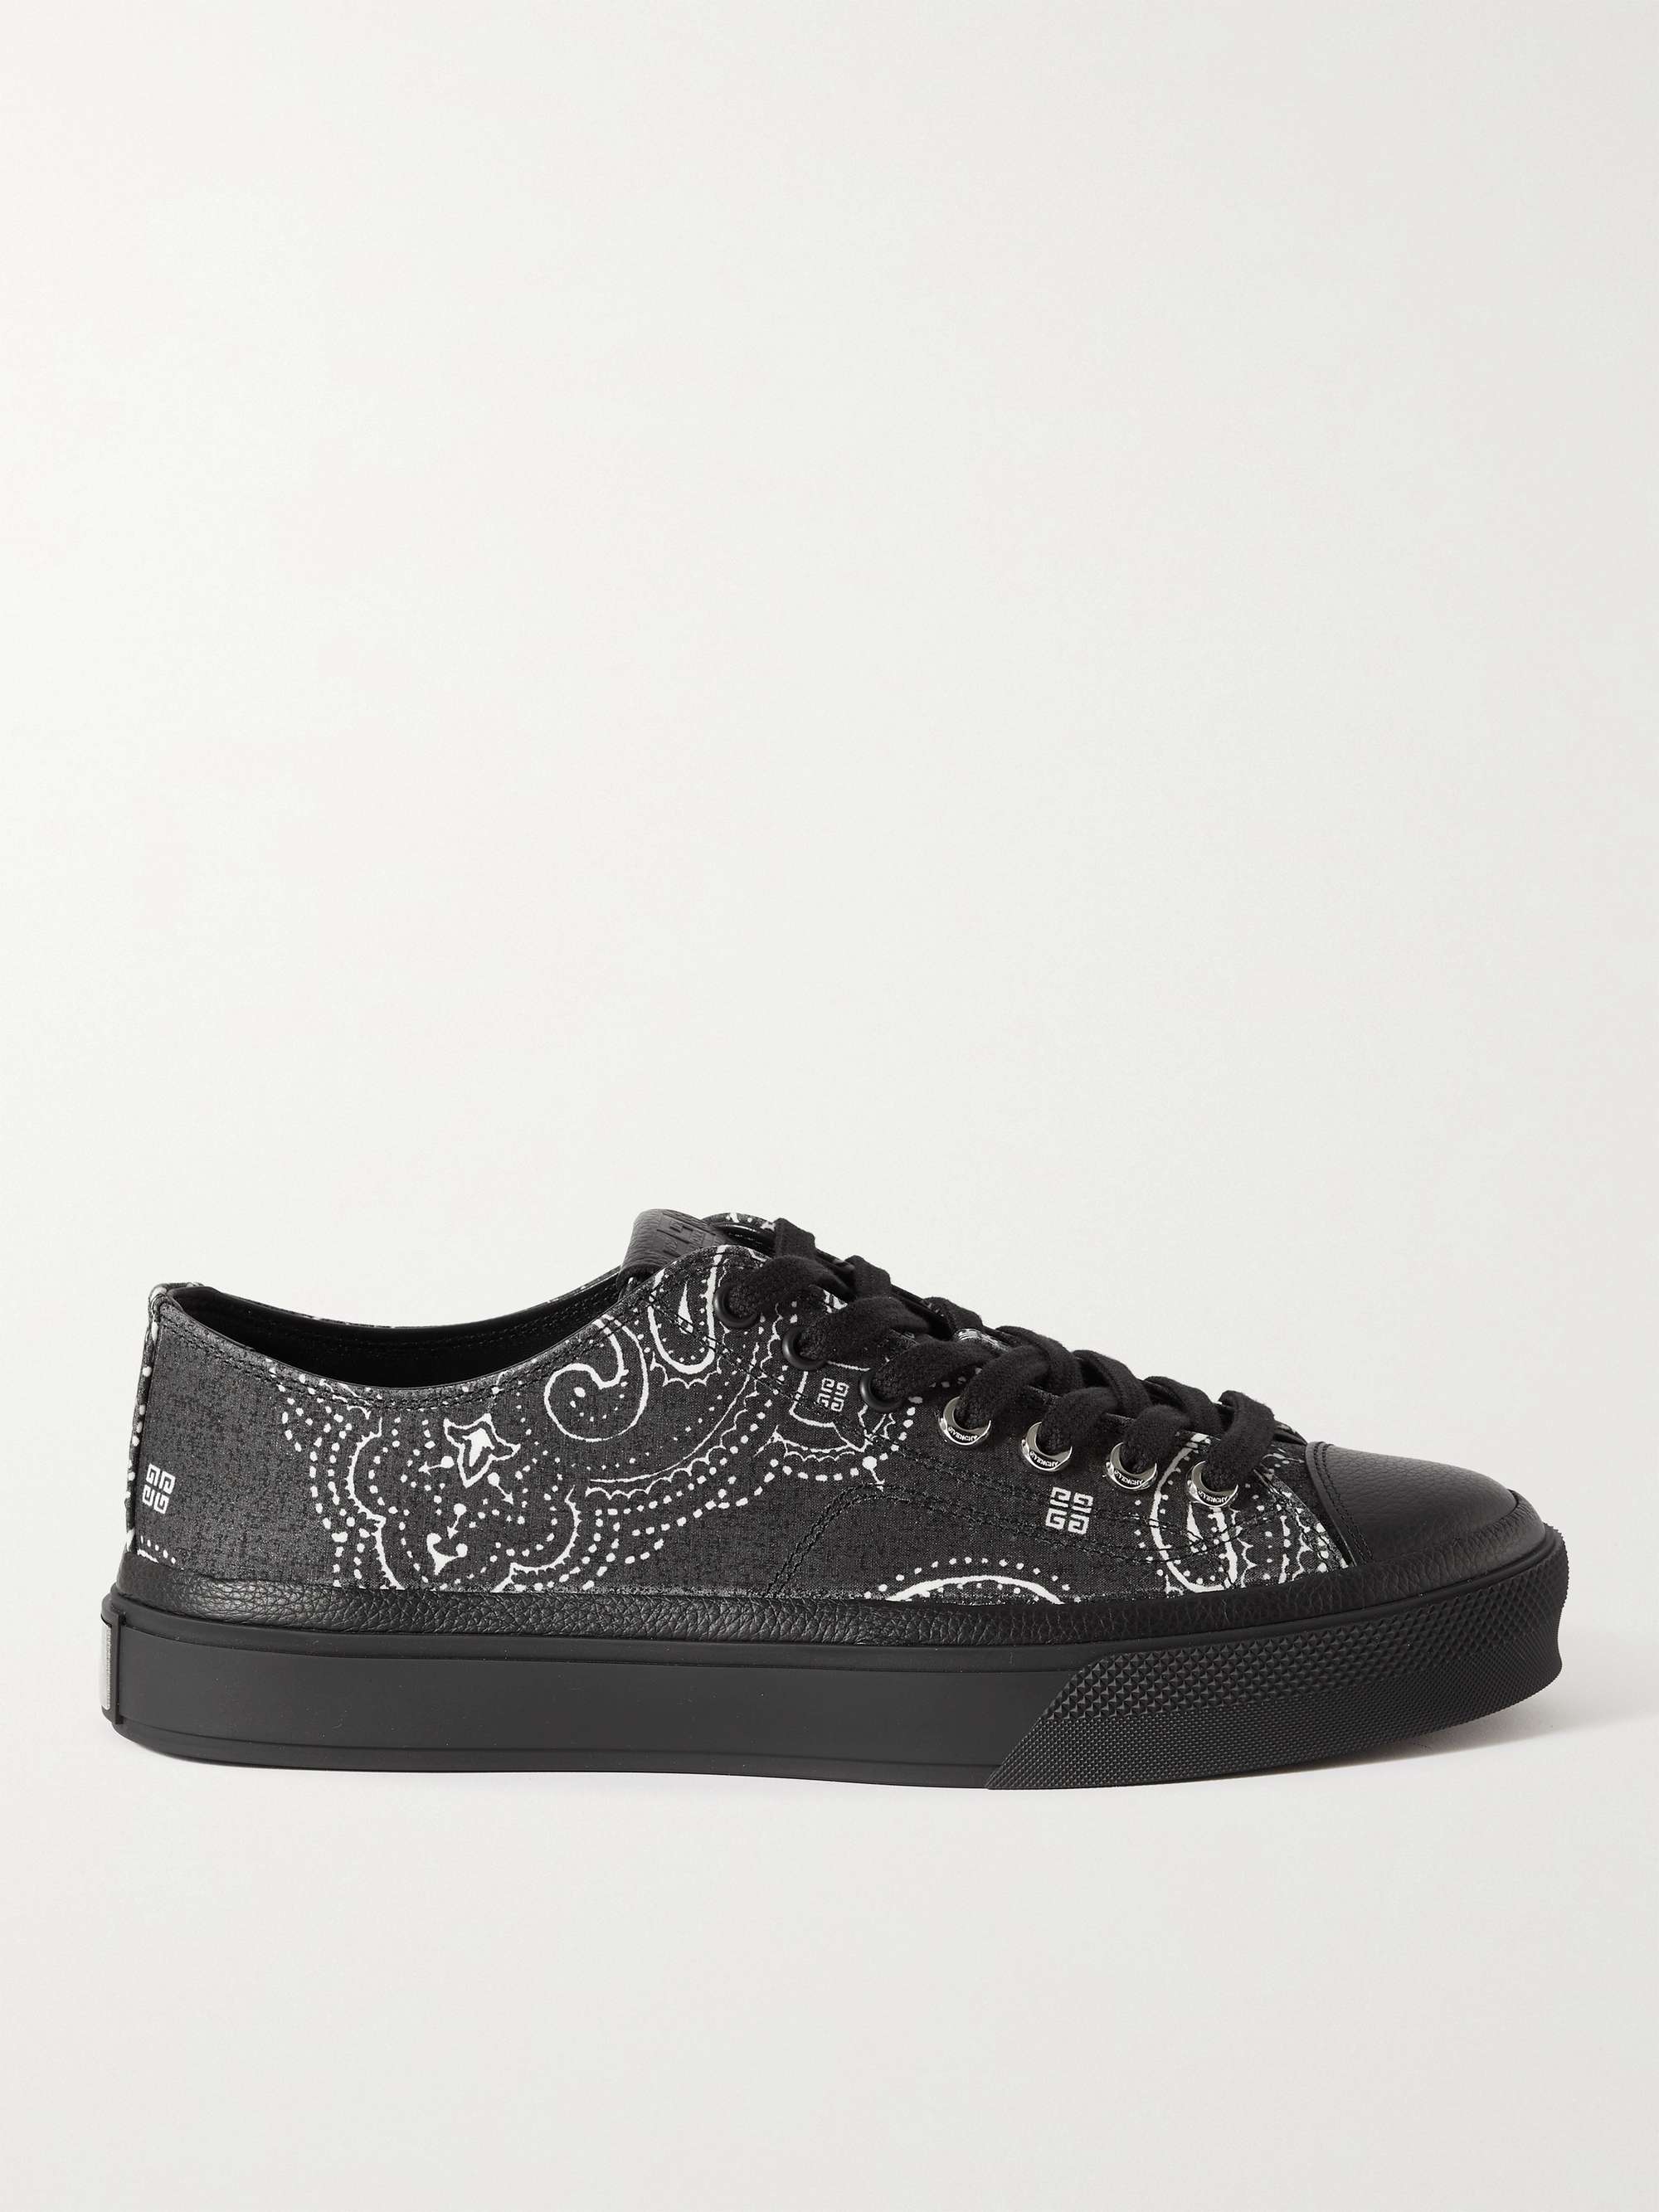 City Leather-Trimmed Bandana-Print Canvas Sneakers